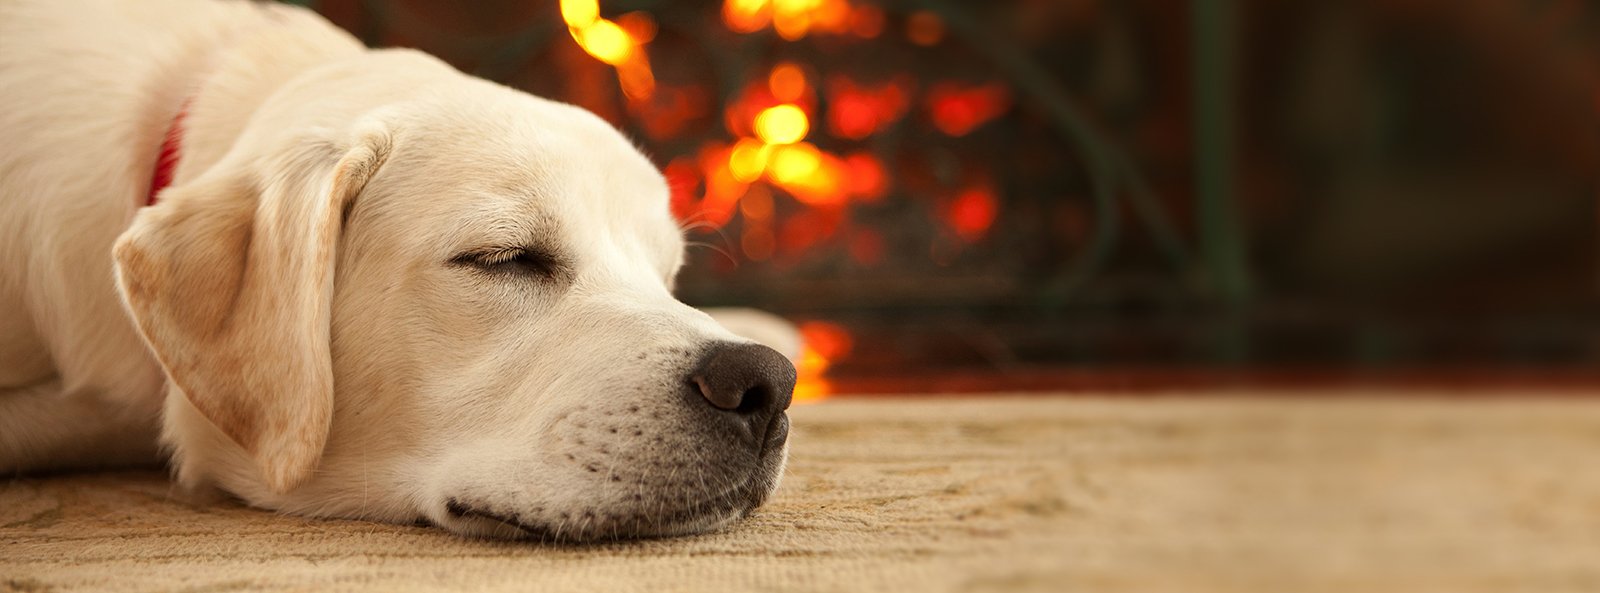 Labrador relaxing by a fire in a house prepared for winter